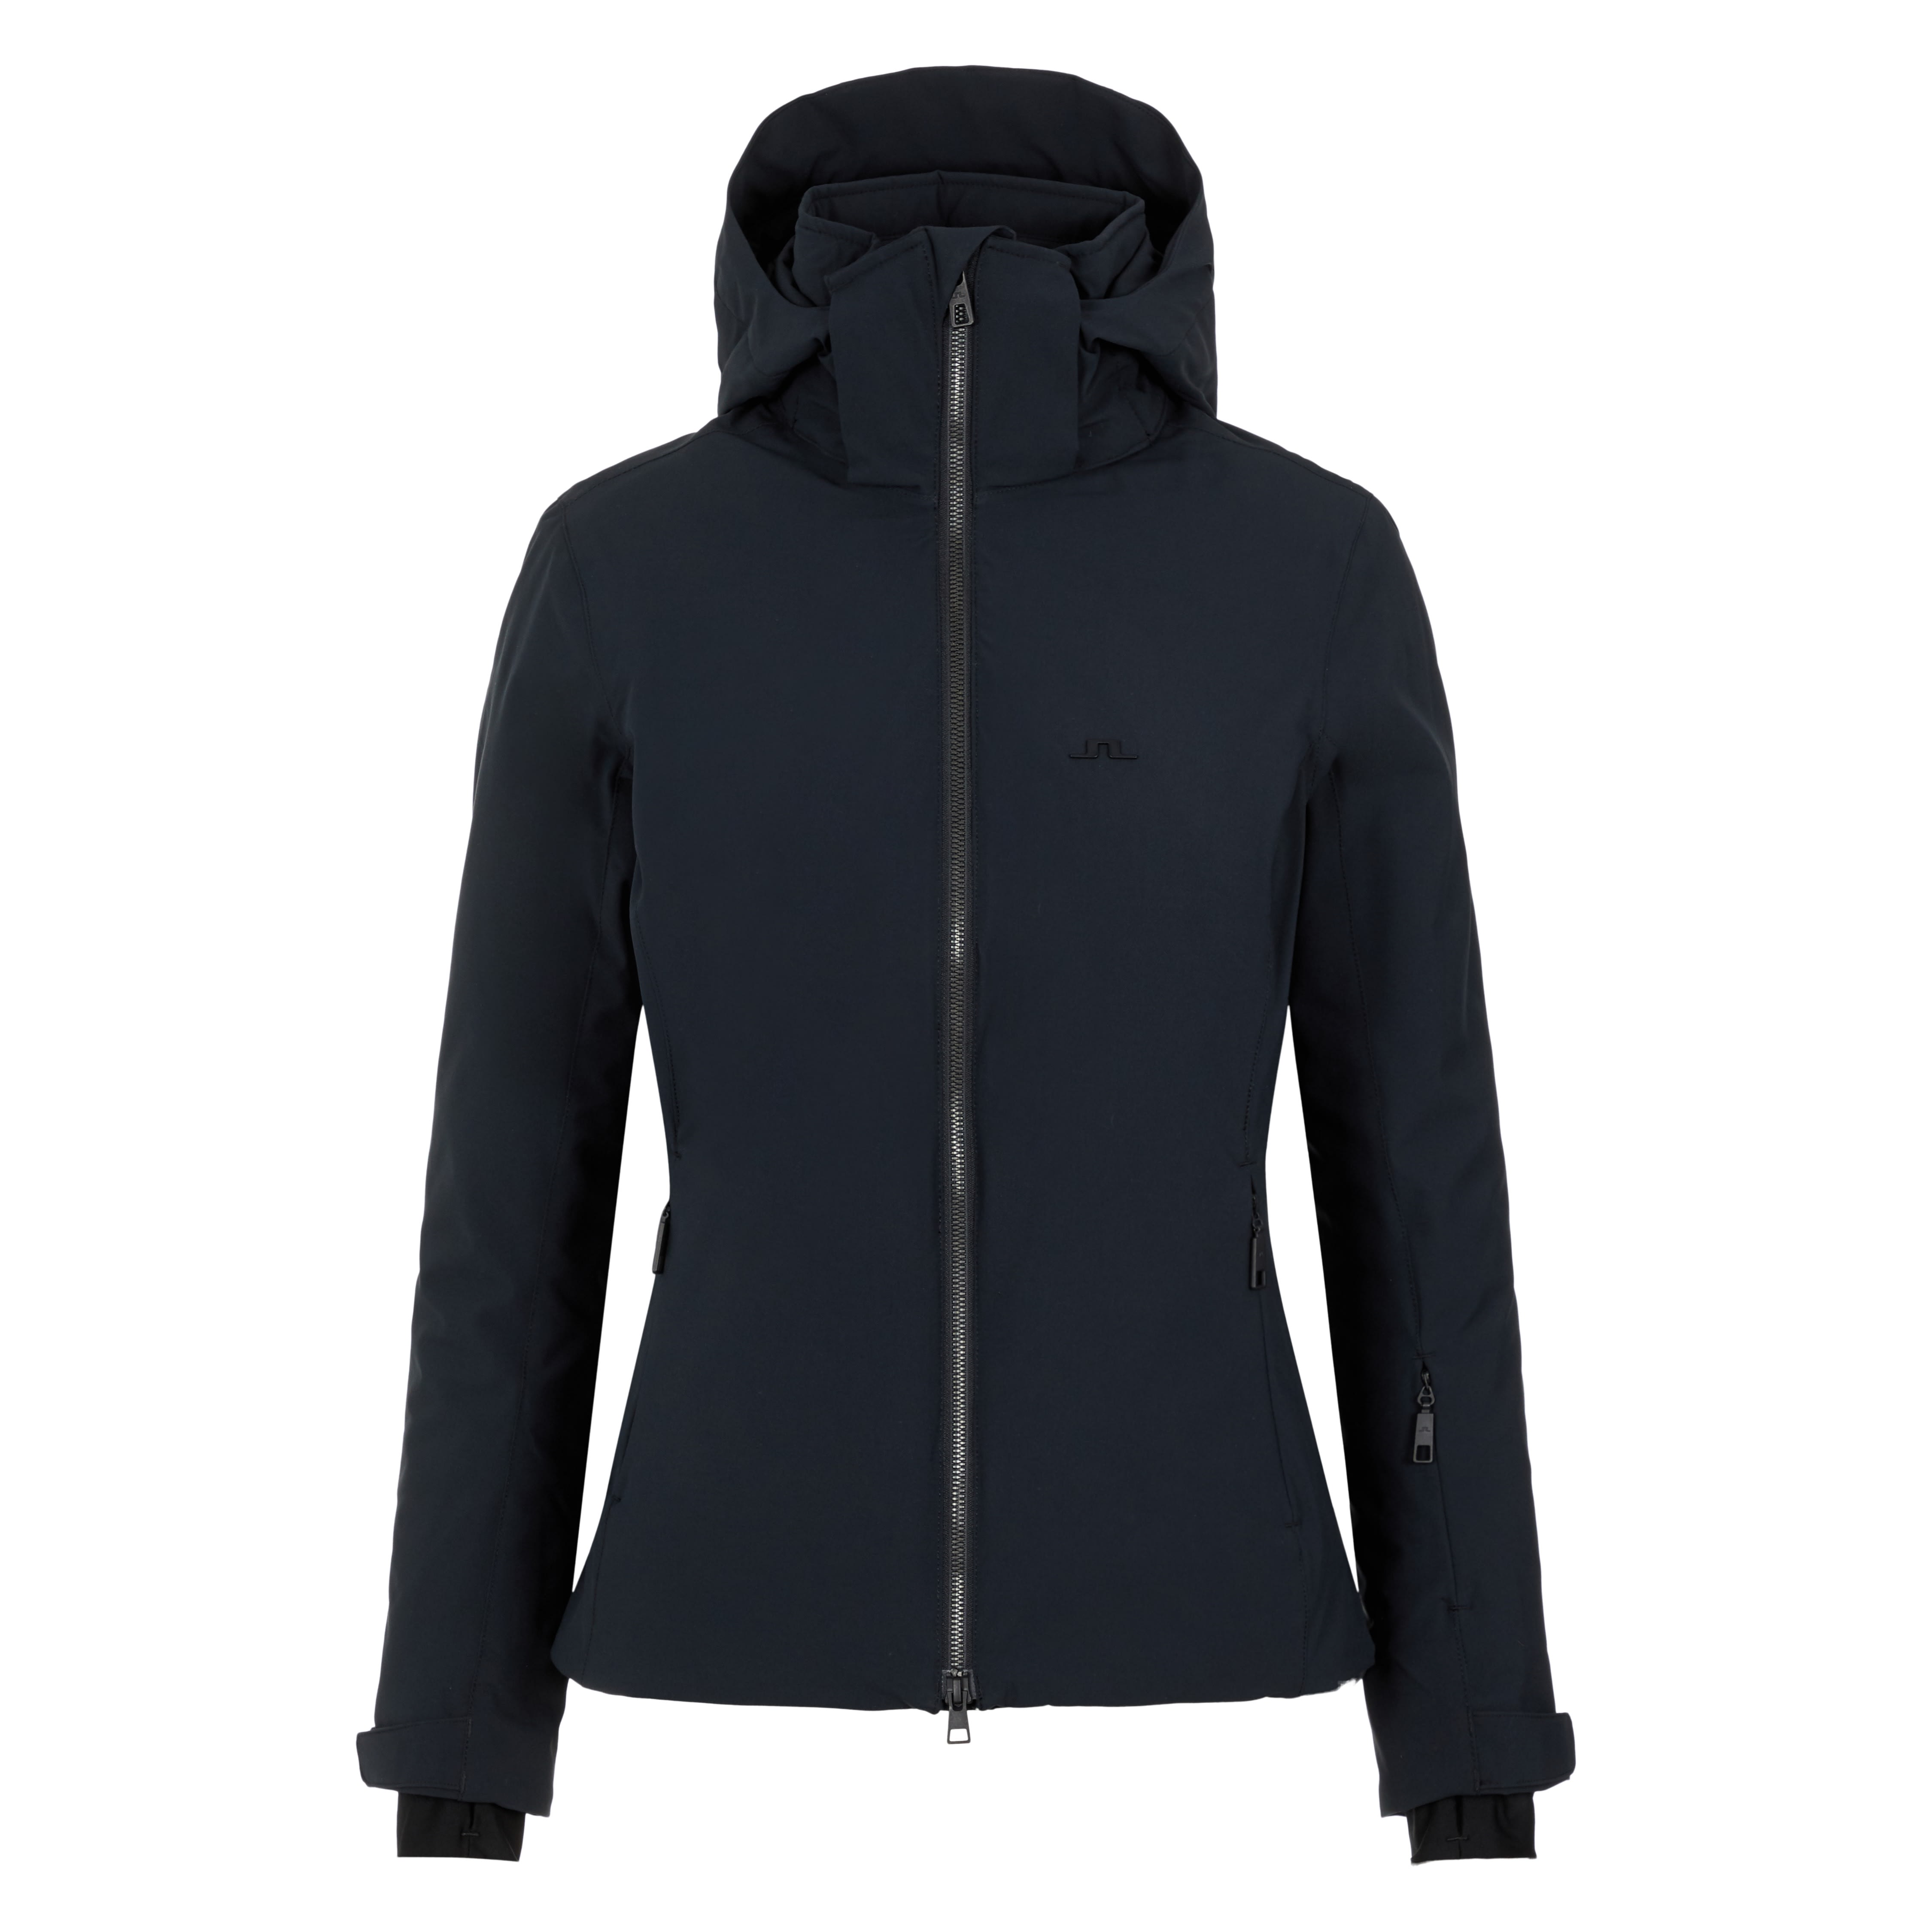 J.Lindeberg Women's Tracy Ski Jacket from Outnorth